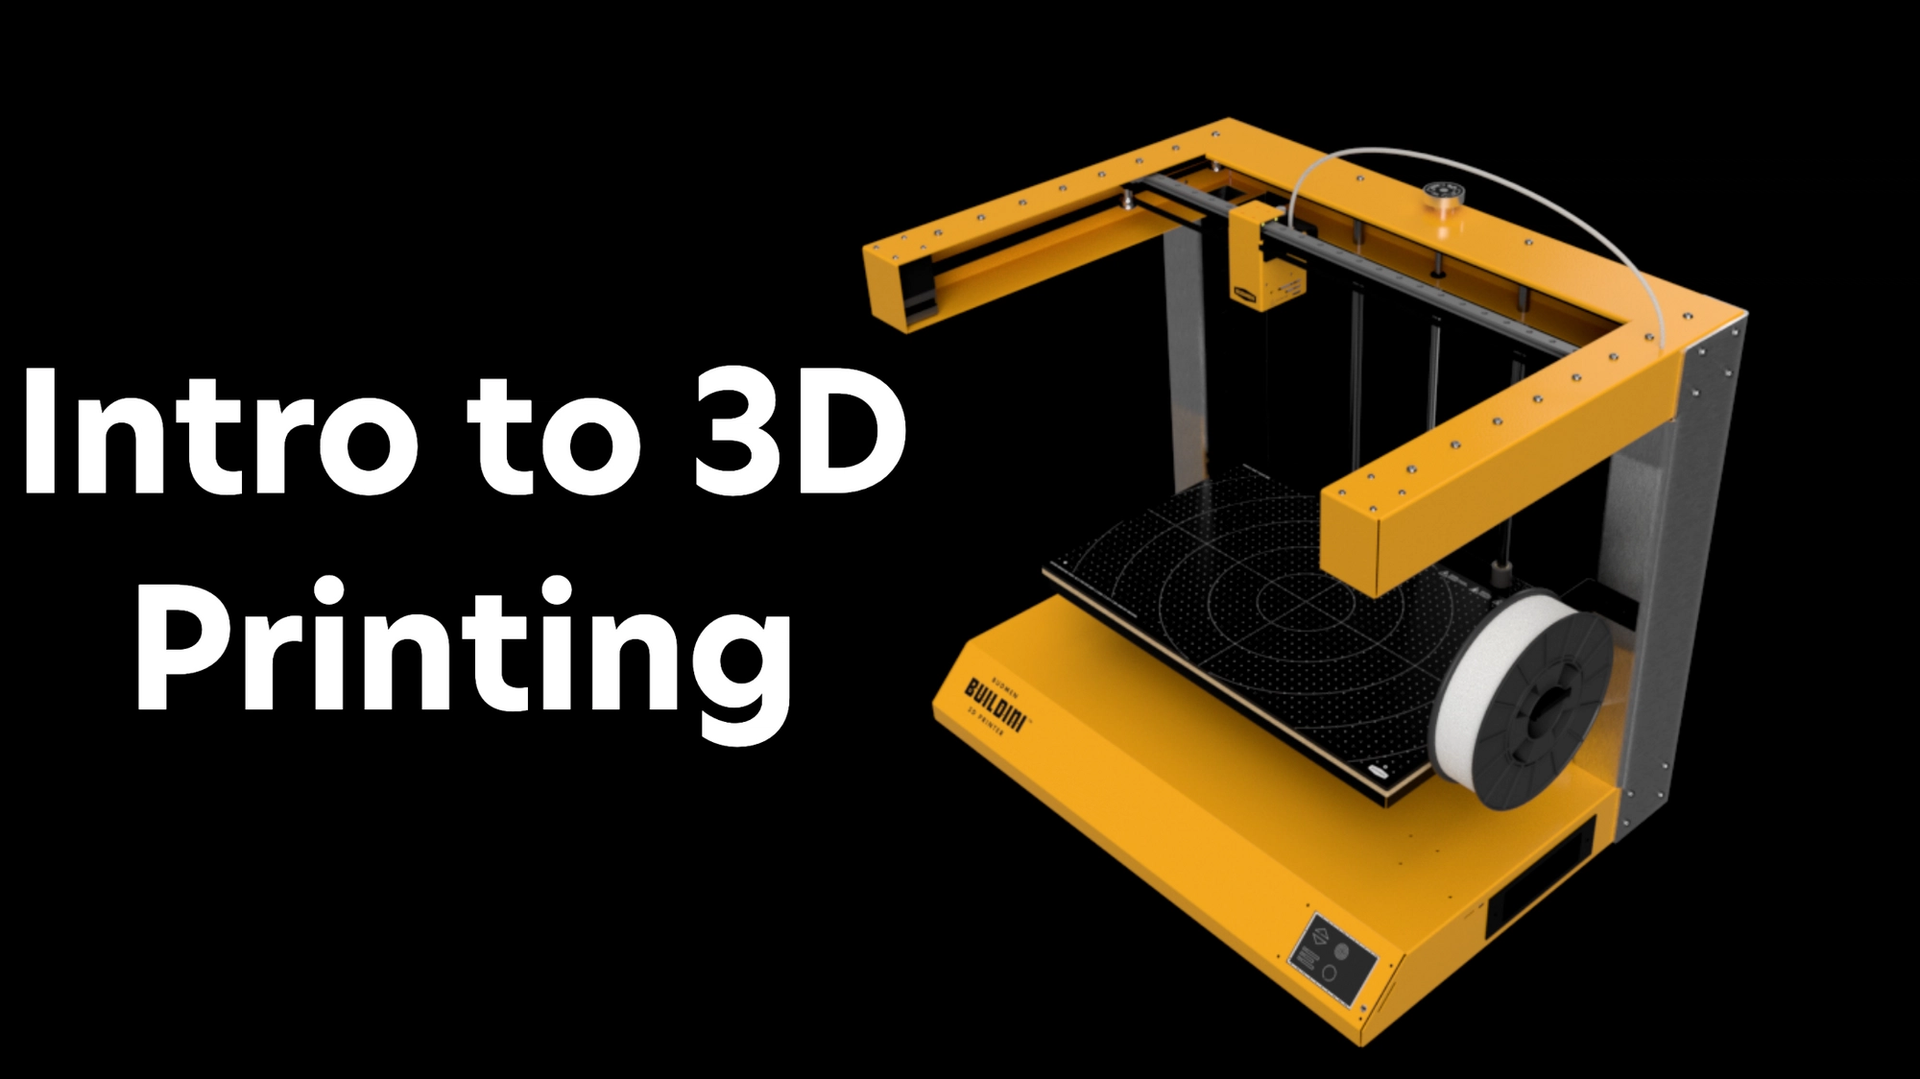 Intro to 3D Printing